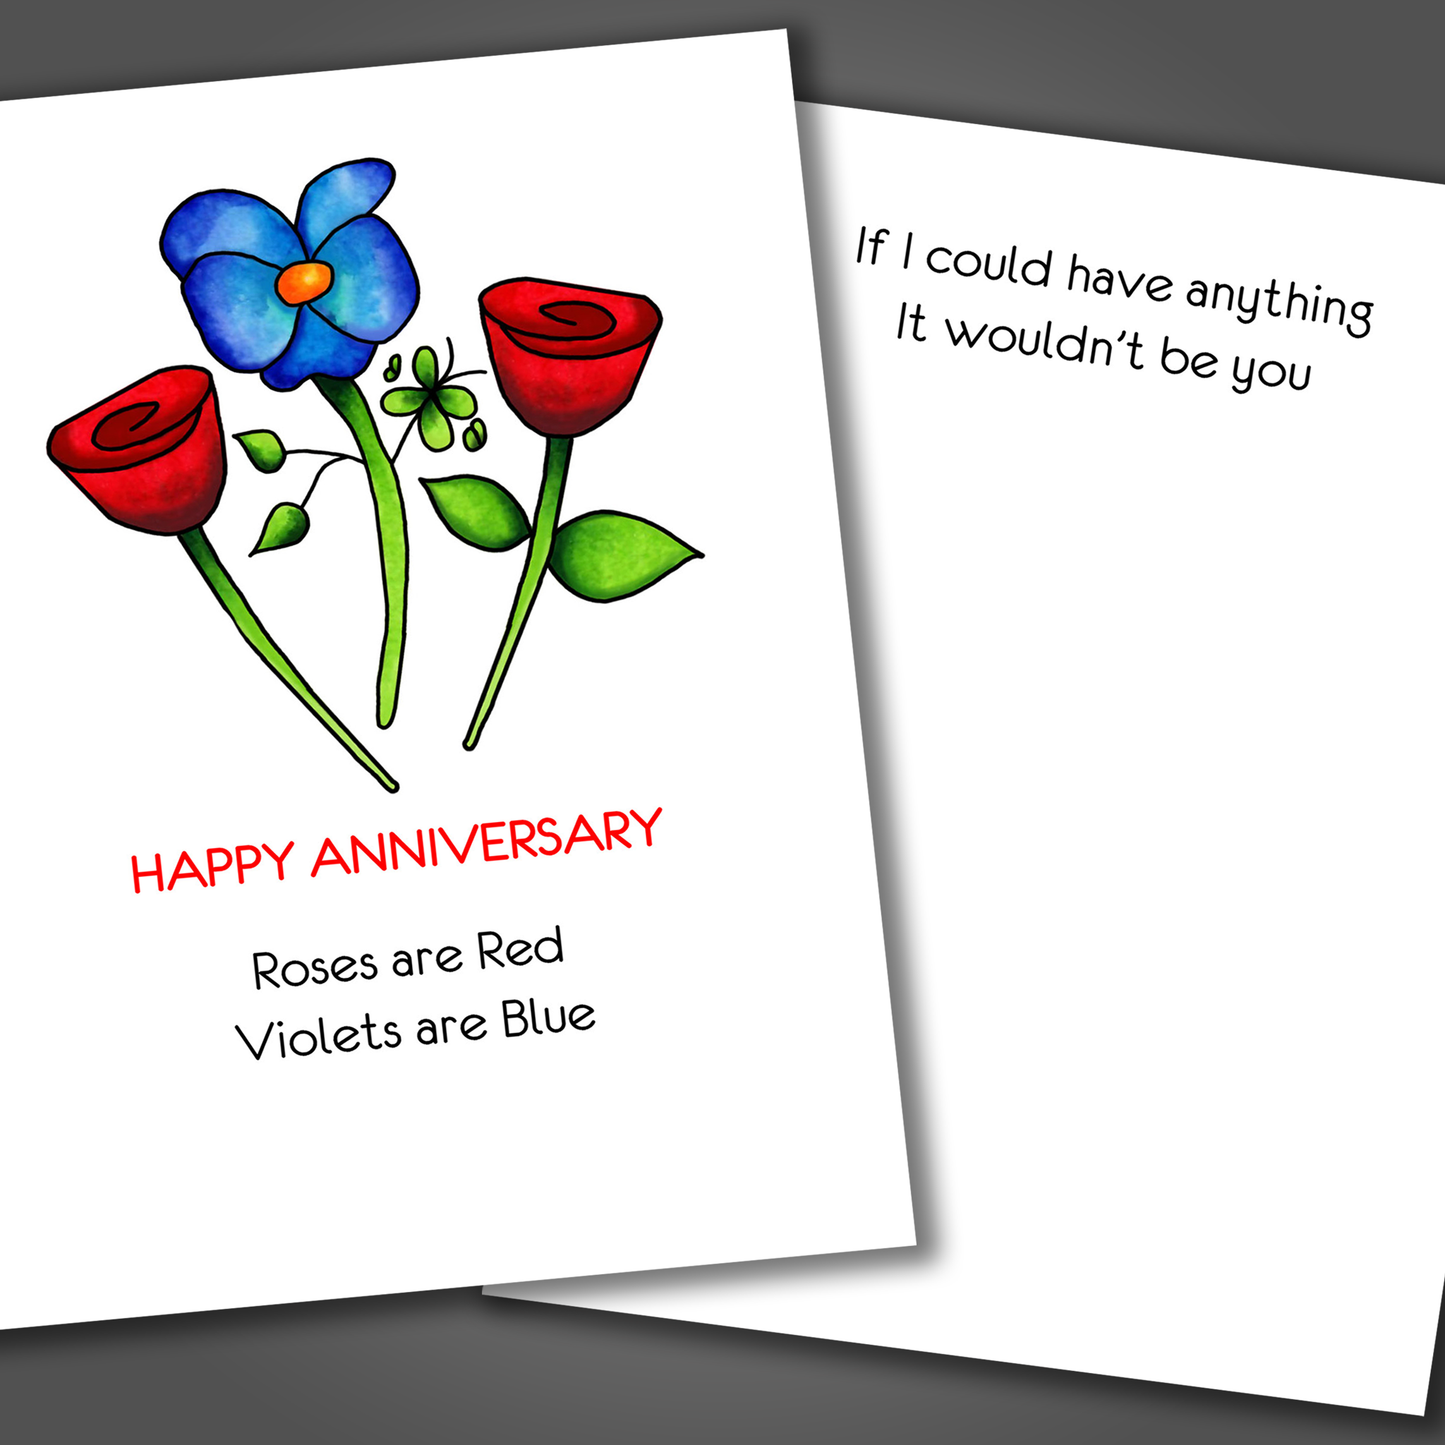 Funny happy anniversary card with two roses and a violet drawn on the front of the card. Inside the card is a funny joke that ends in if I could have anything it wouldn't be you.